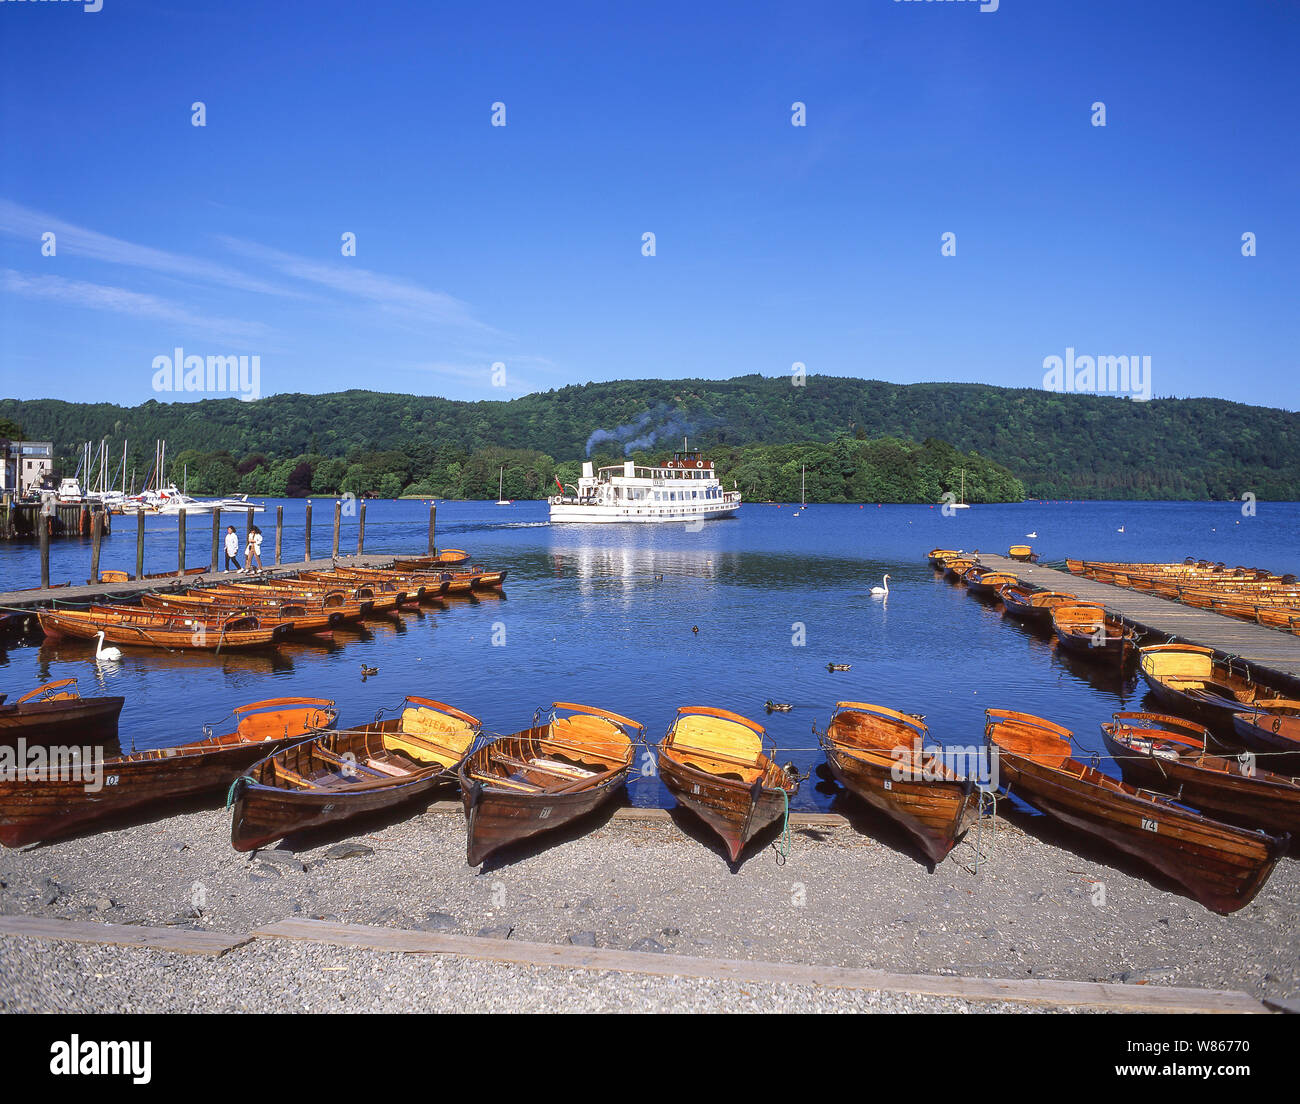 Cruise boat and rowing boats on Lake Windermere, Bowness-on-Windermere, Cumbria, England, United Kingdom Stock Photo